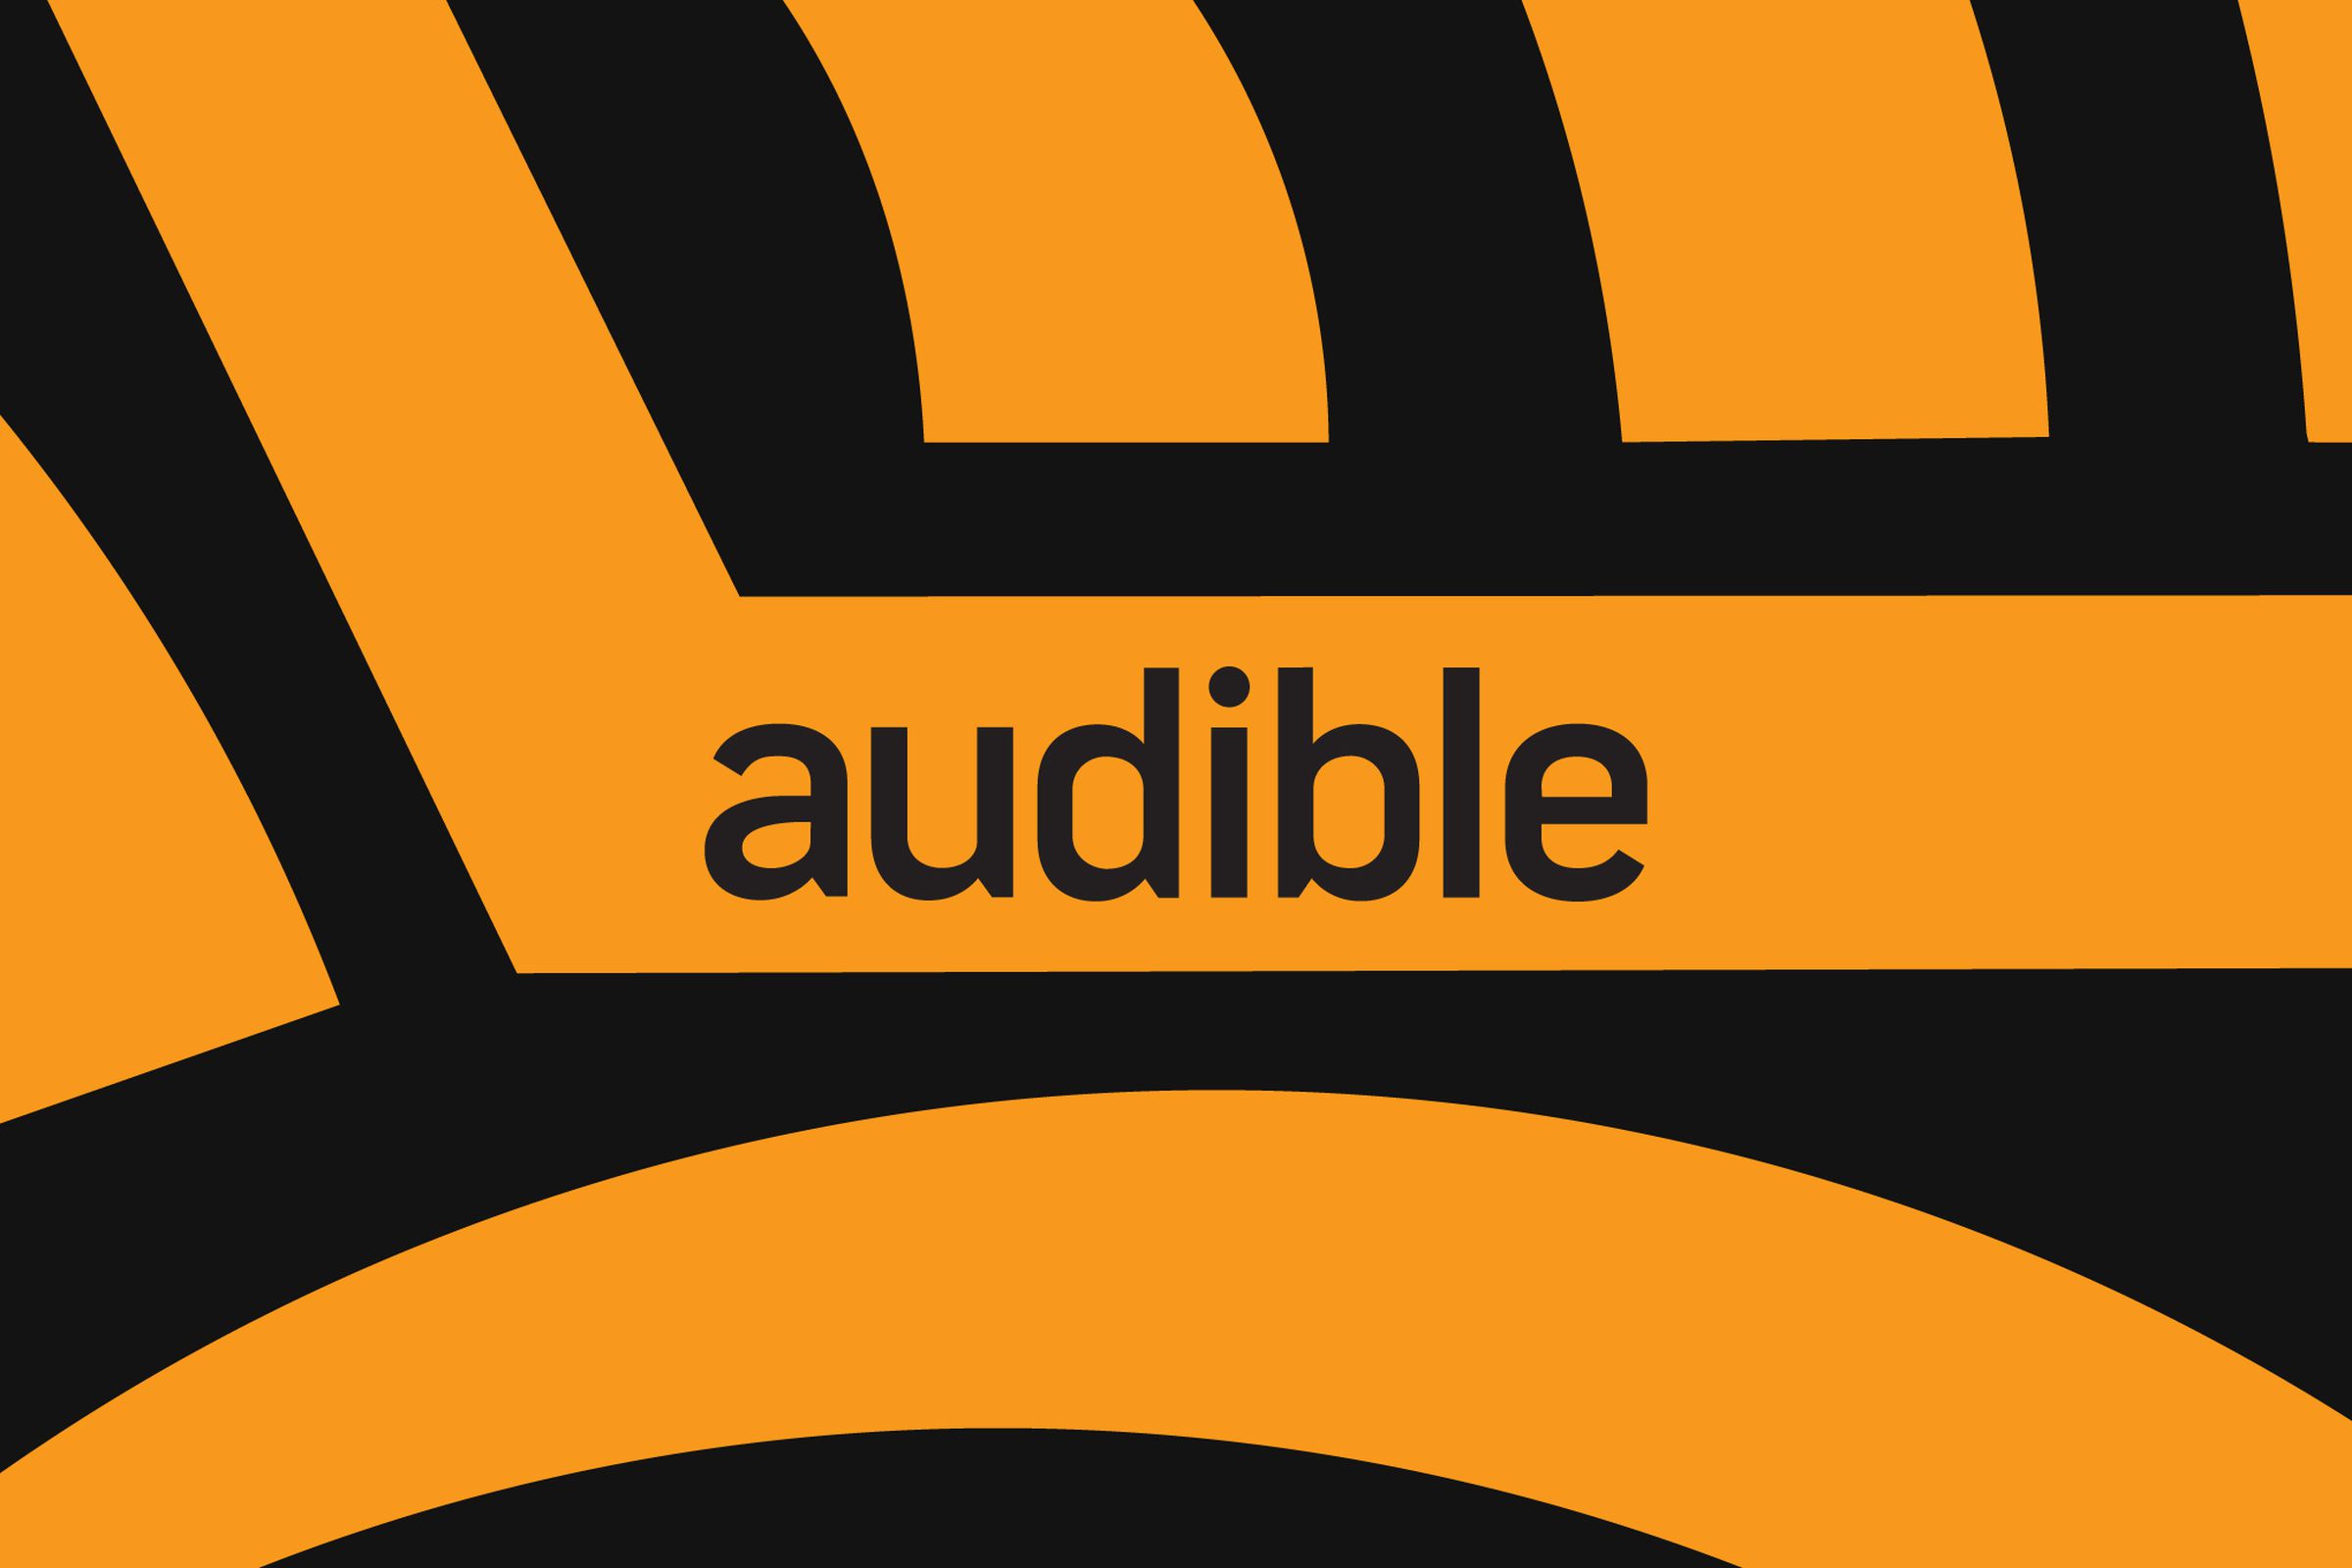 An image showing the Audible logo on a black and yellow background